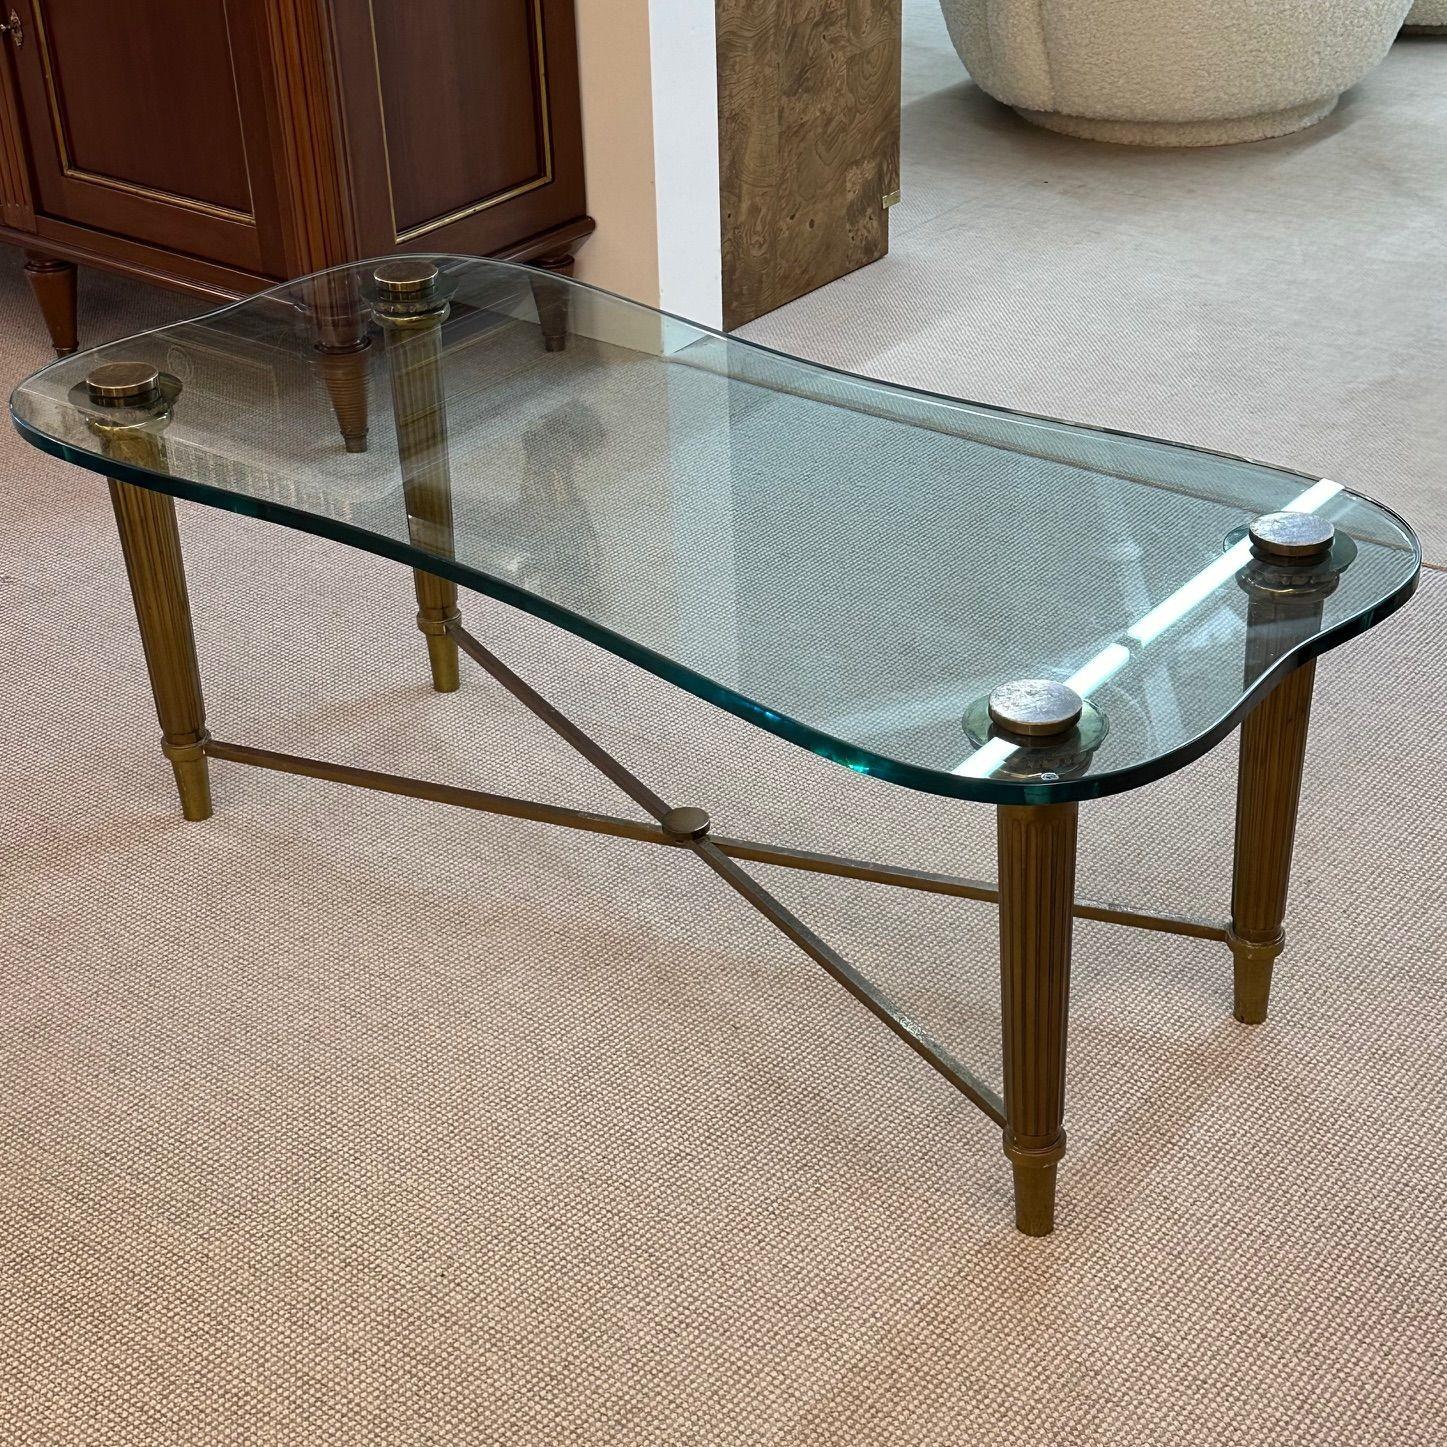 French Neo-Classical Glass Top Coffee Table, Mid-Century Modern PE Guerin Style

Petite coffee table having an organic form glass top supported by four reeded and tapered bronze legs.

Bronze, Glass
American, 1980s

Height: 18 inches, Width: 47